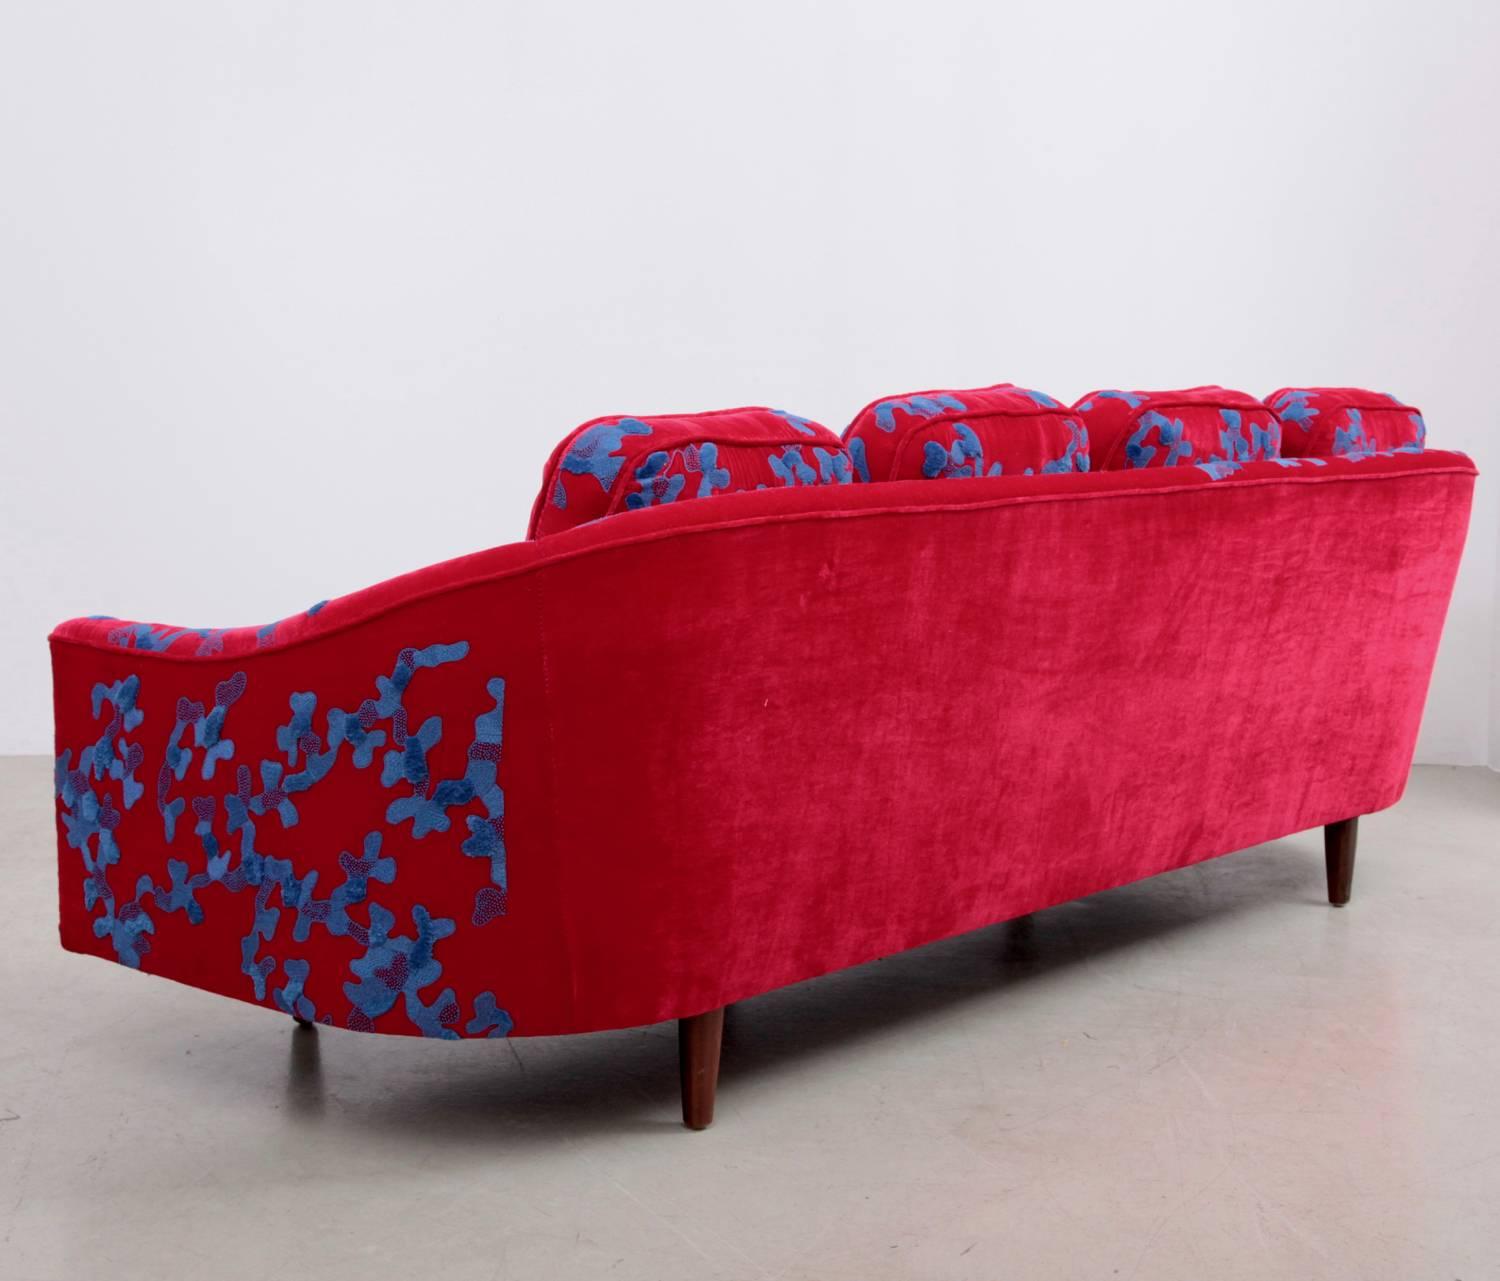 Red and Blue Harvey Probber Sofa with Jupe by Jackie Hand Embroidered Fabric In Excellent Condition For Sale In Berlin, DE